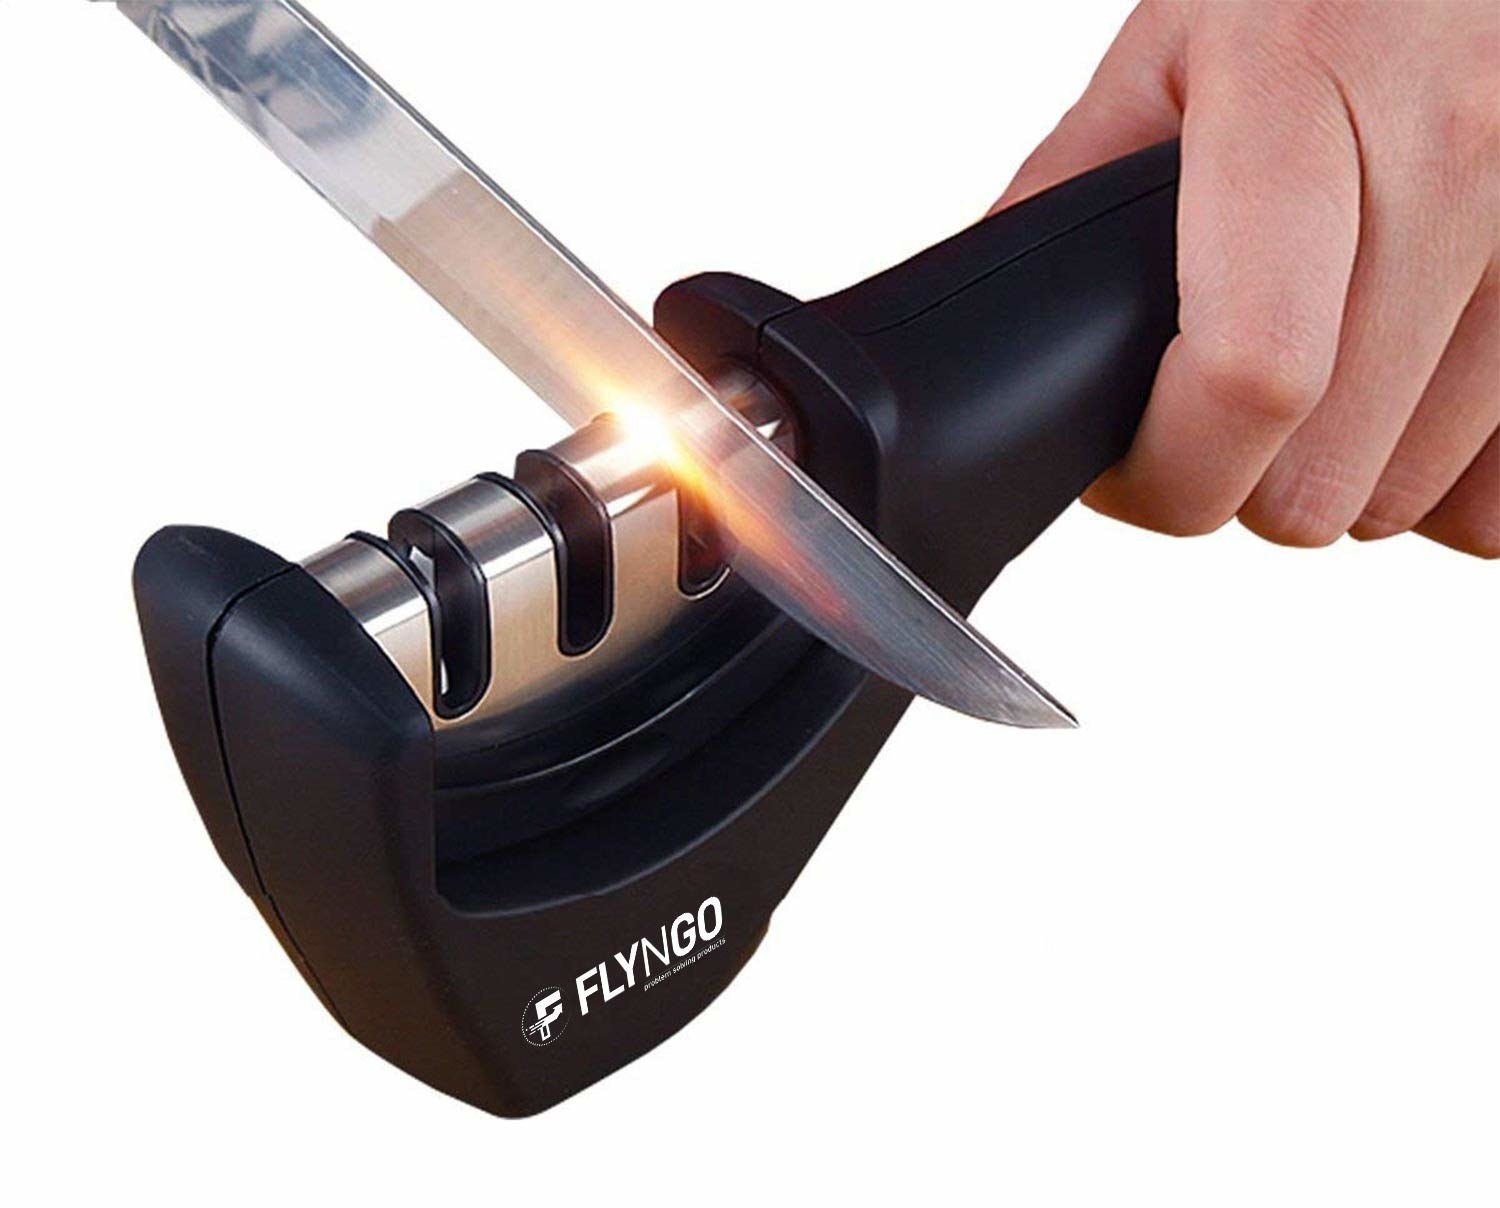 A knife sharpener with a knife being sharpened in it